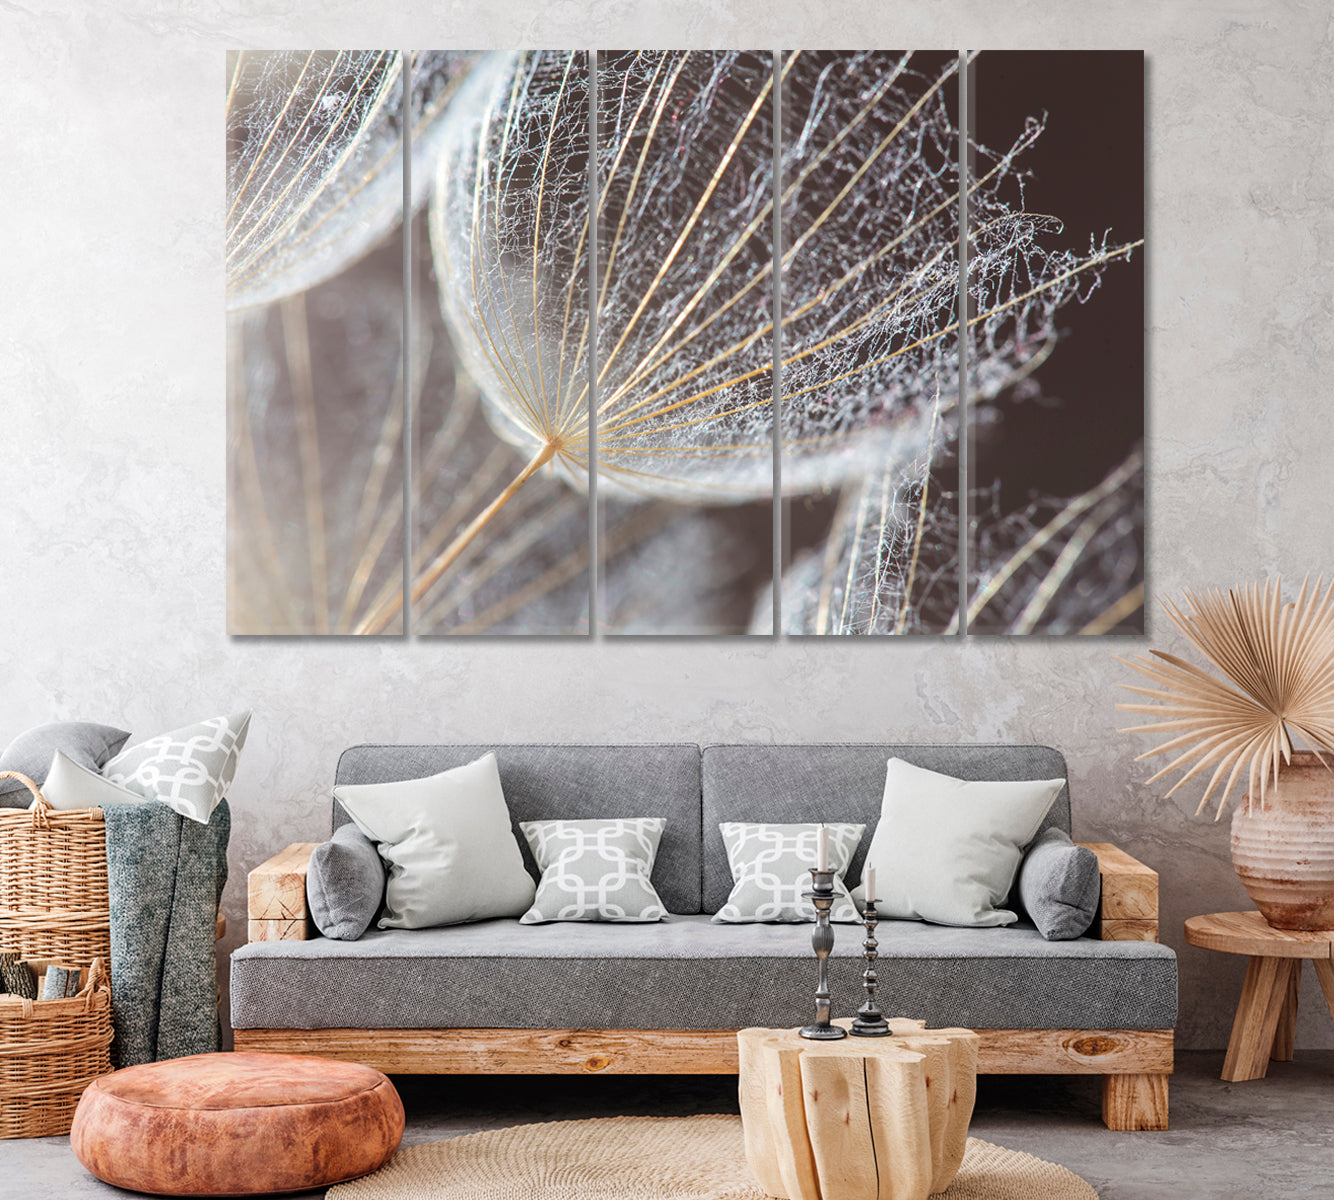 Dandelion Seed Canvas Print ArtLexy 5 Panels 36"x24" inches 